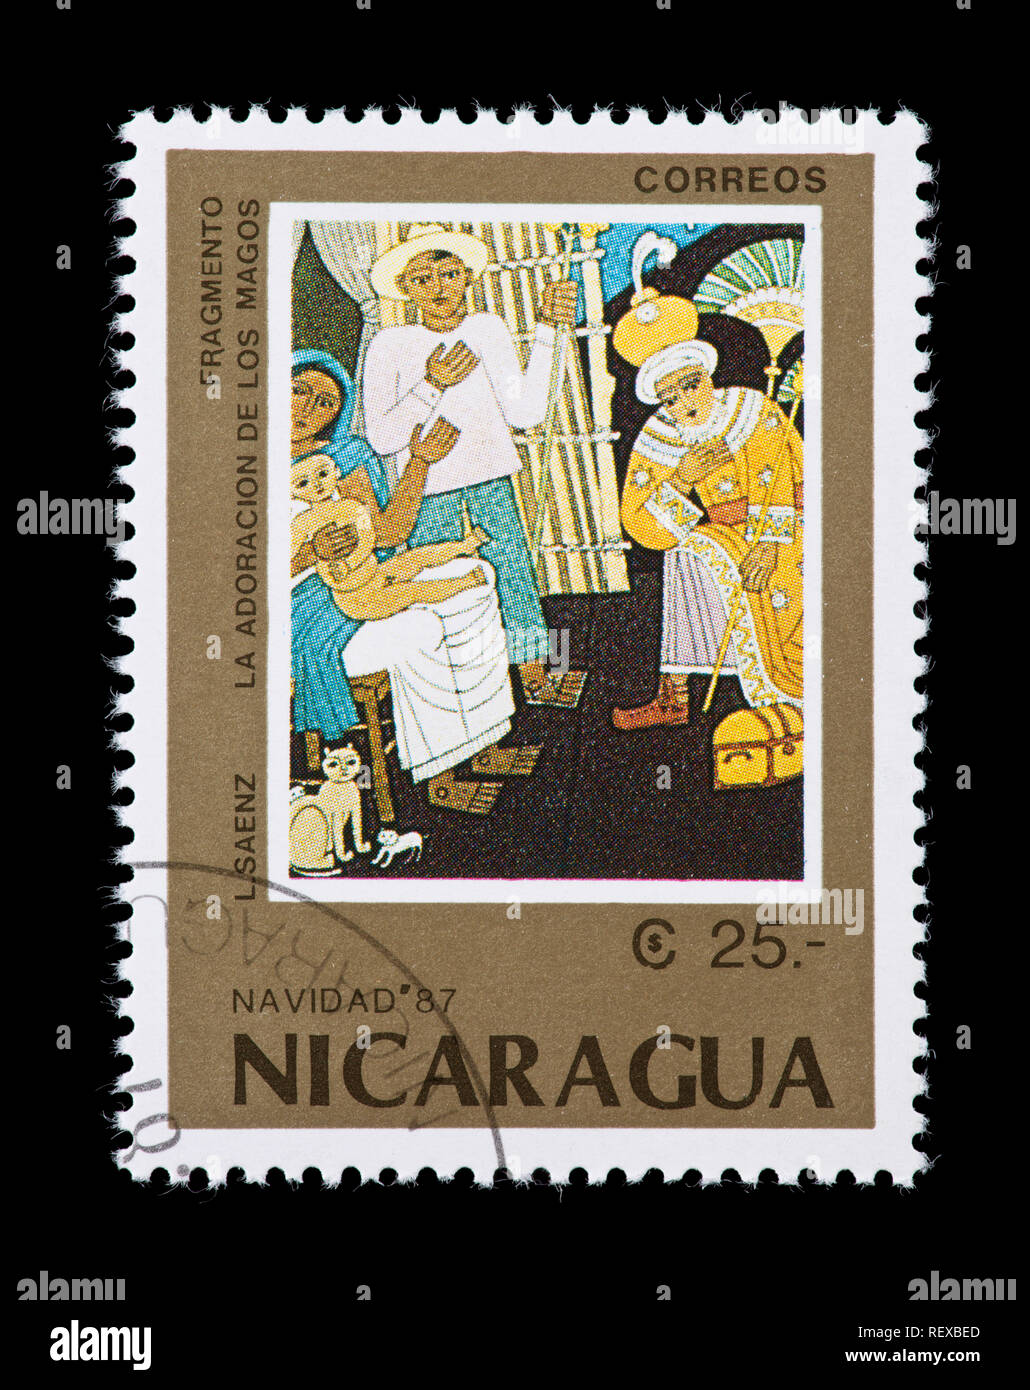 Postage stamp from Nicaragua depicting a L. Saenz painting of the Adoration of the Magi Stock Photo